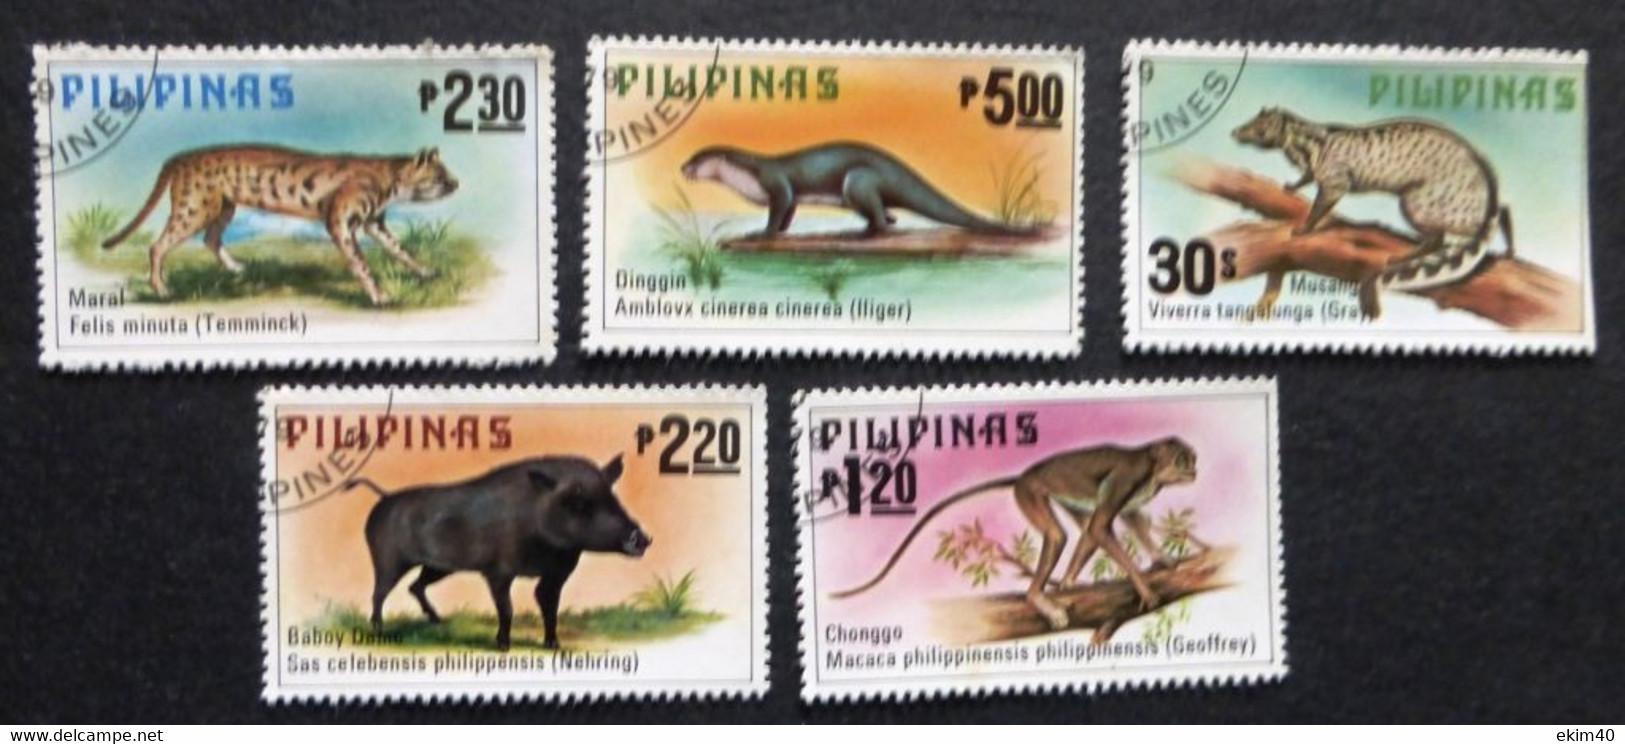 Selection Of Used/Cancelled Stamps From Philippines Wild Animals. No DC-373 - Used Stamps